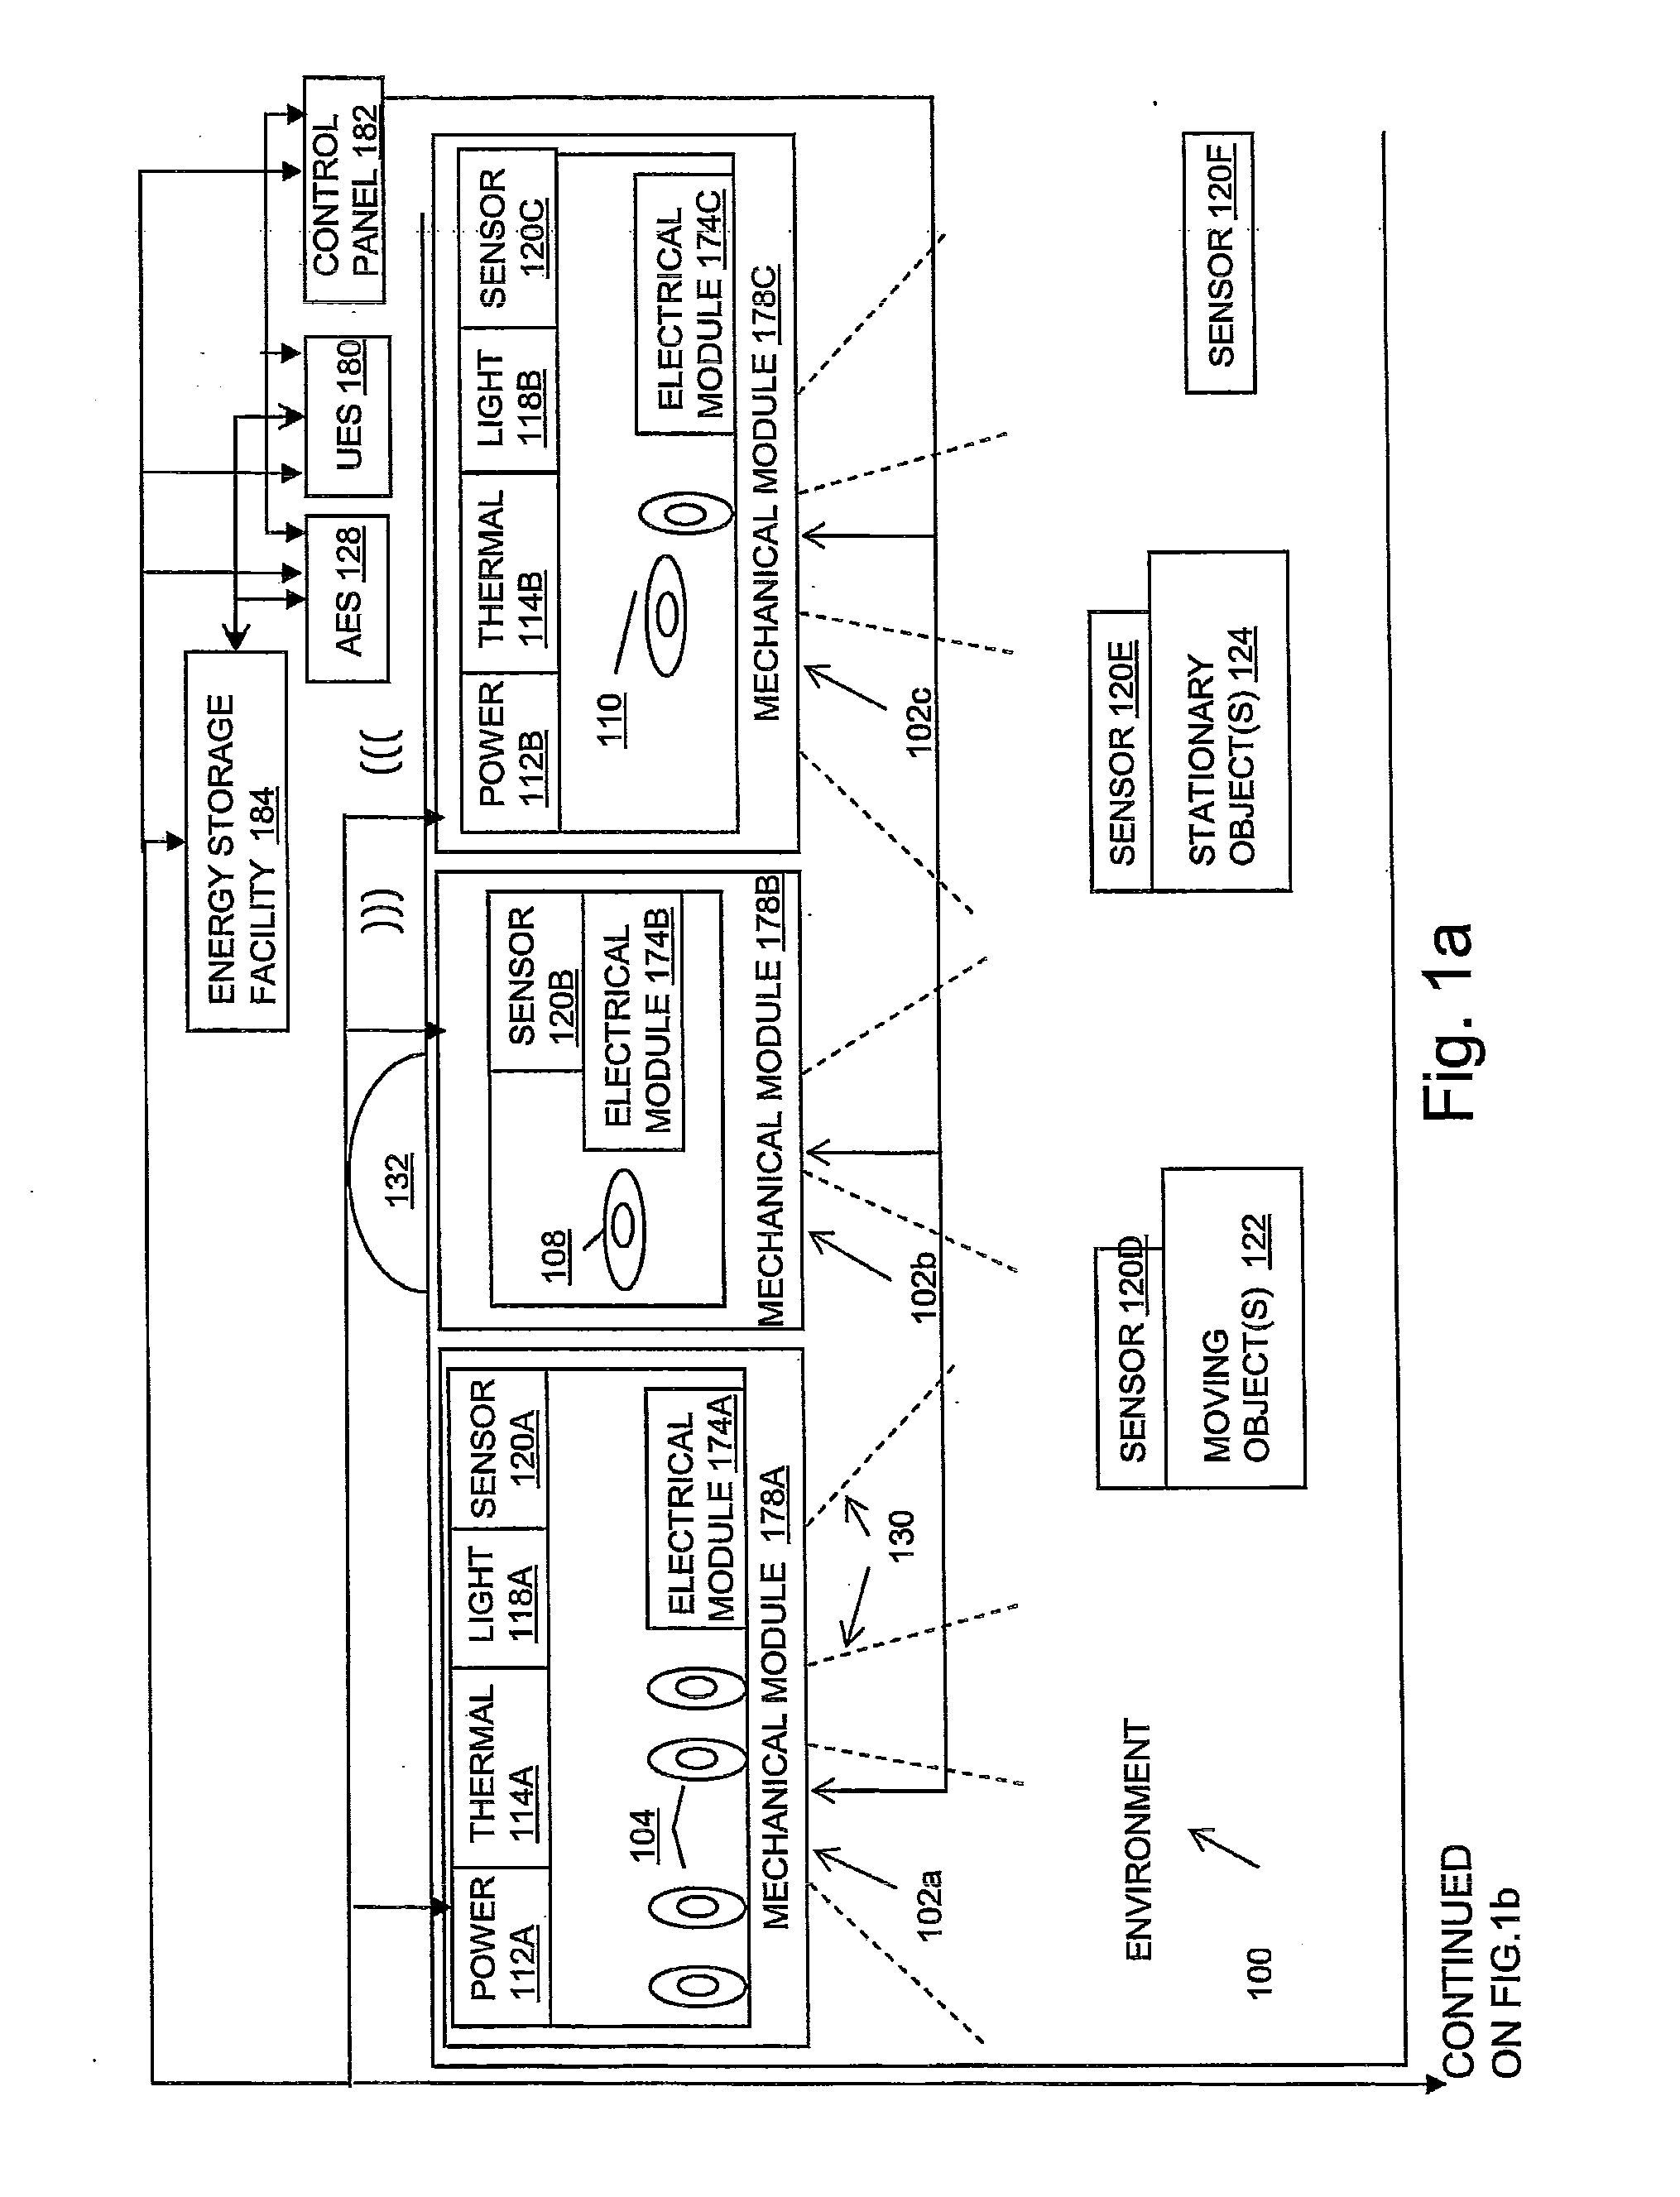 Power Management Unit with Ballast Interface